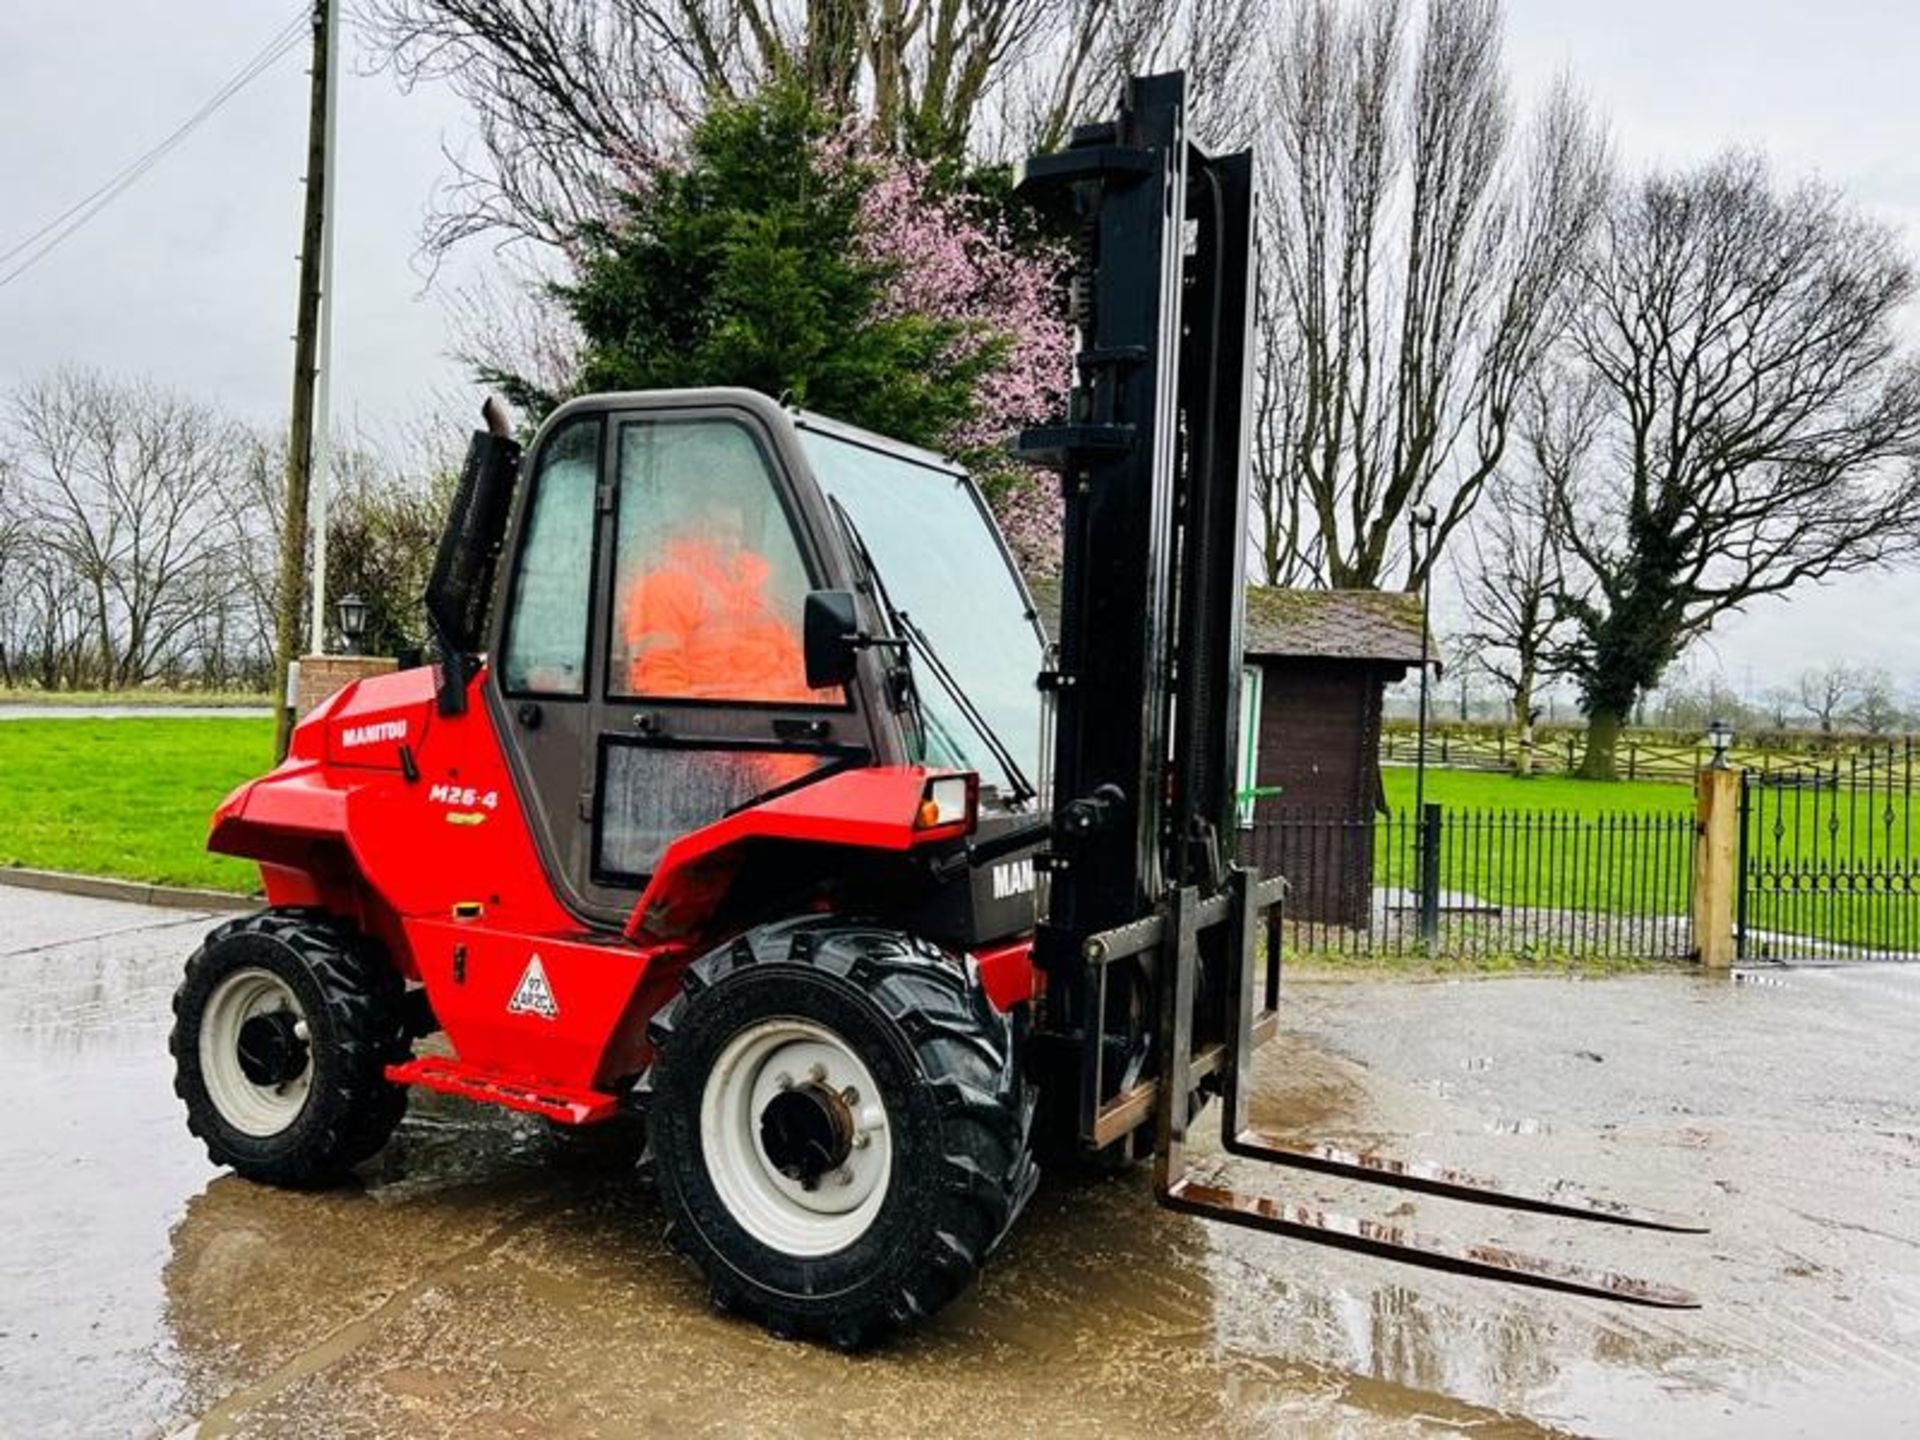 MANITOU M26-4 ROUGH TERRIAN 4WD FORKLIFT *YEAR 2017* C/W PALLET TINES - Image 10 of 16